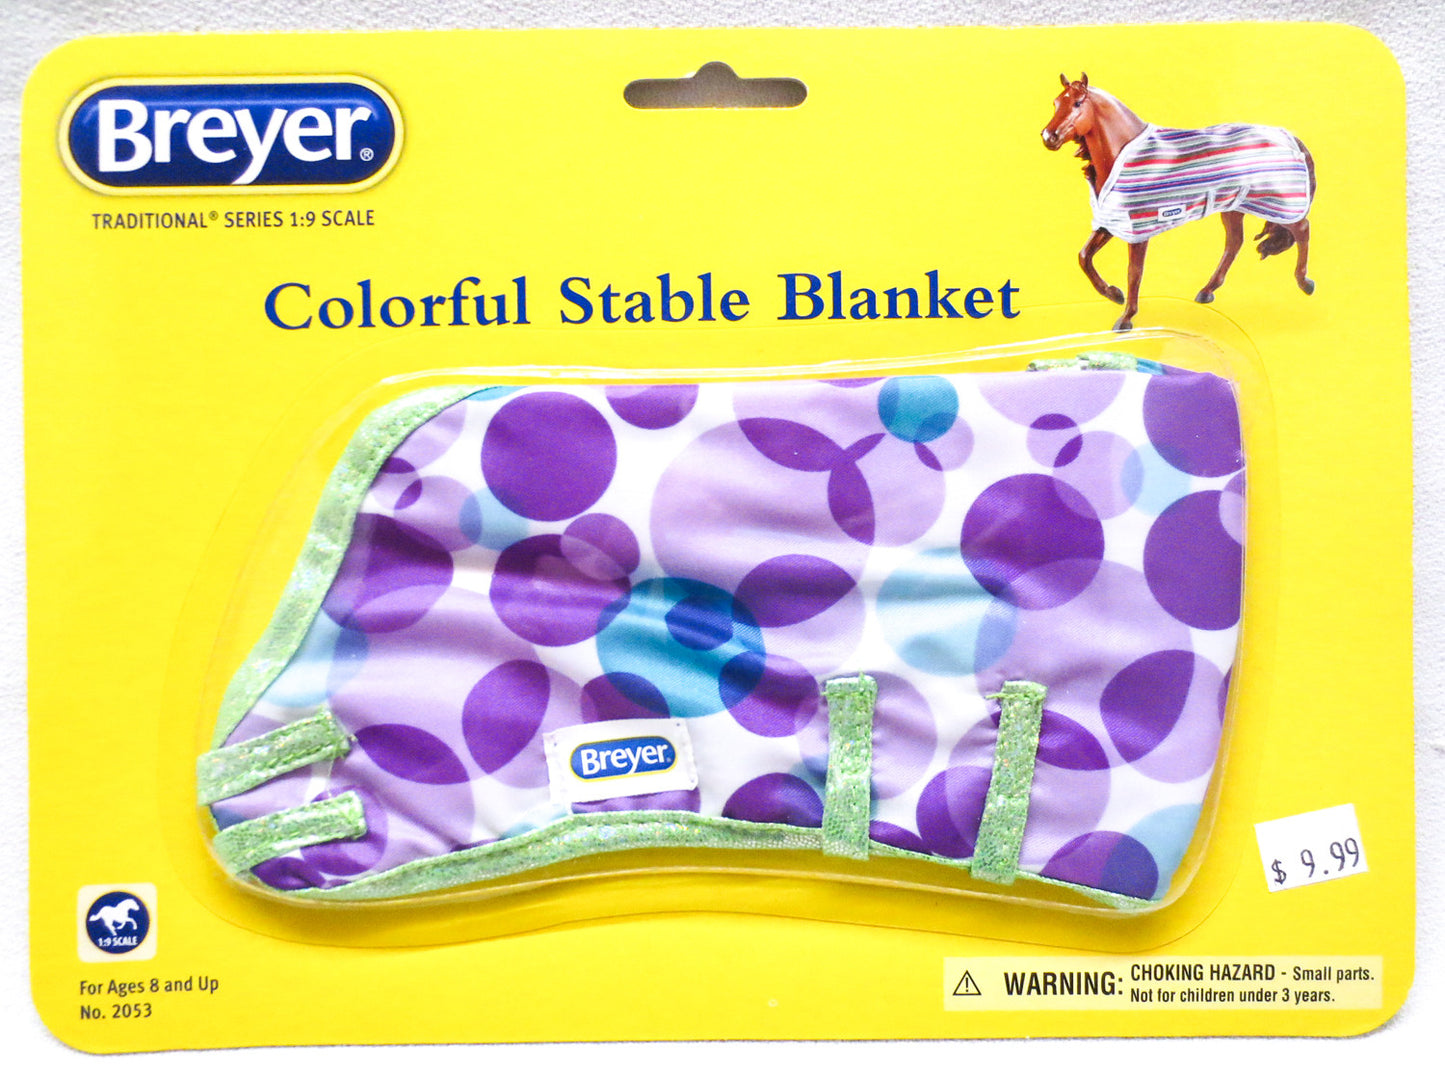 Colorful Stable Blanket - Your Choice of Patterns - triple-mountain